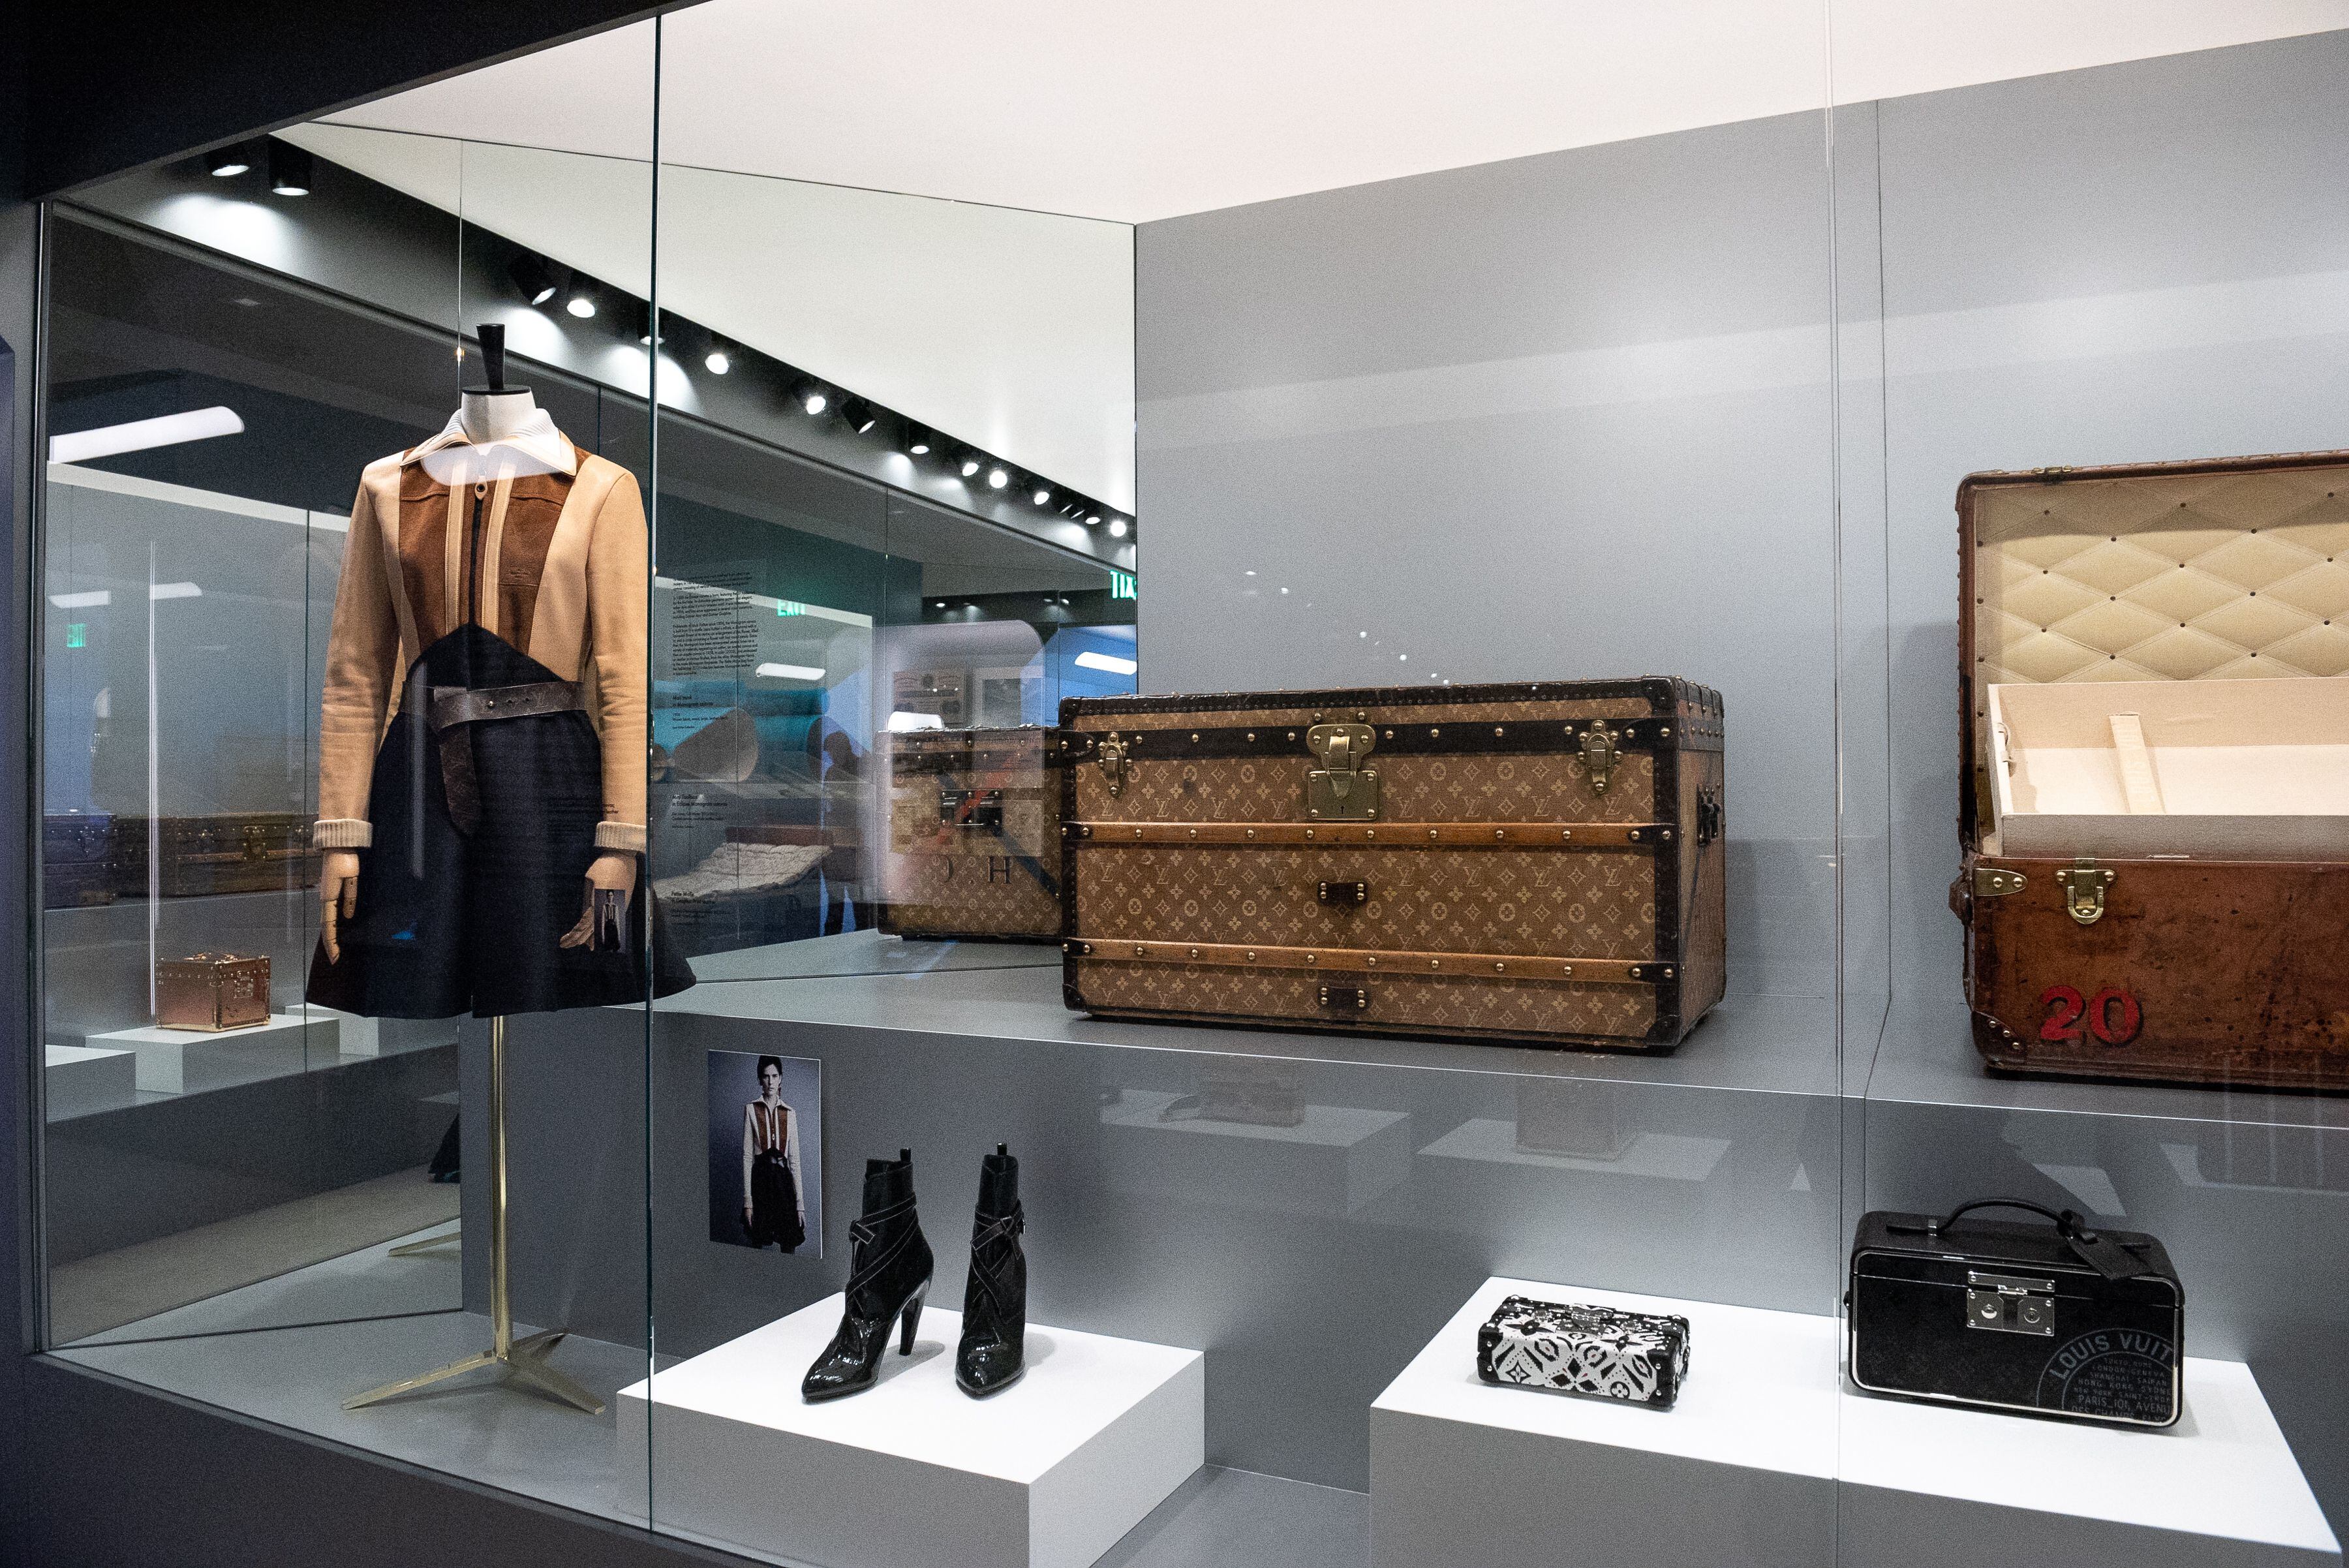 Louis Vuitton's Toronto pop-up explores the luxe side of travel